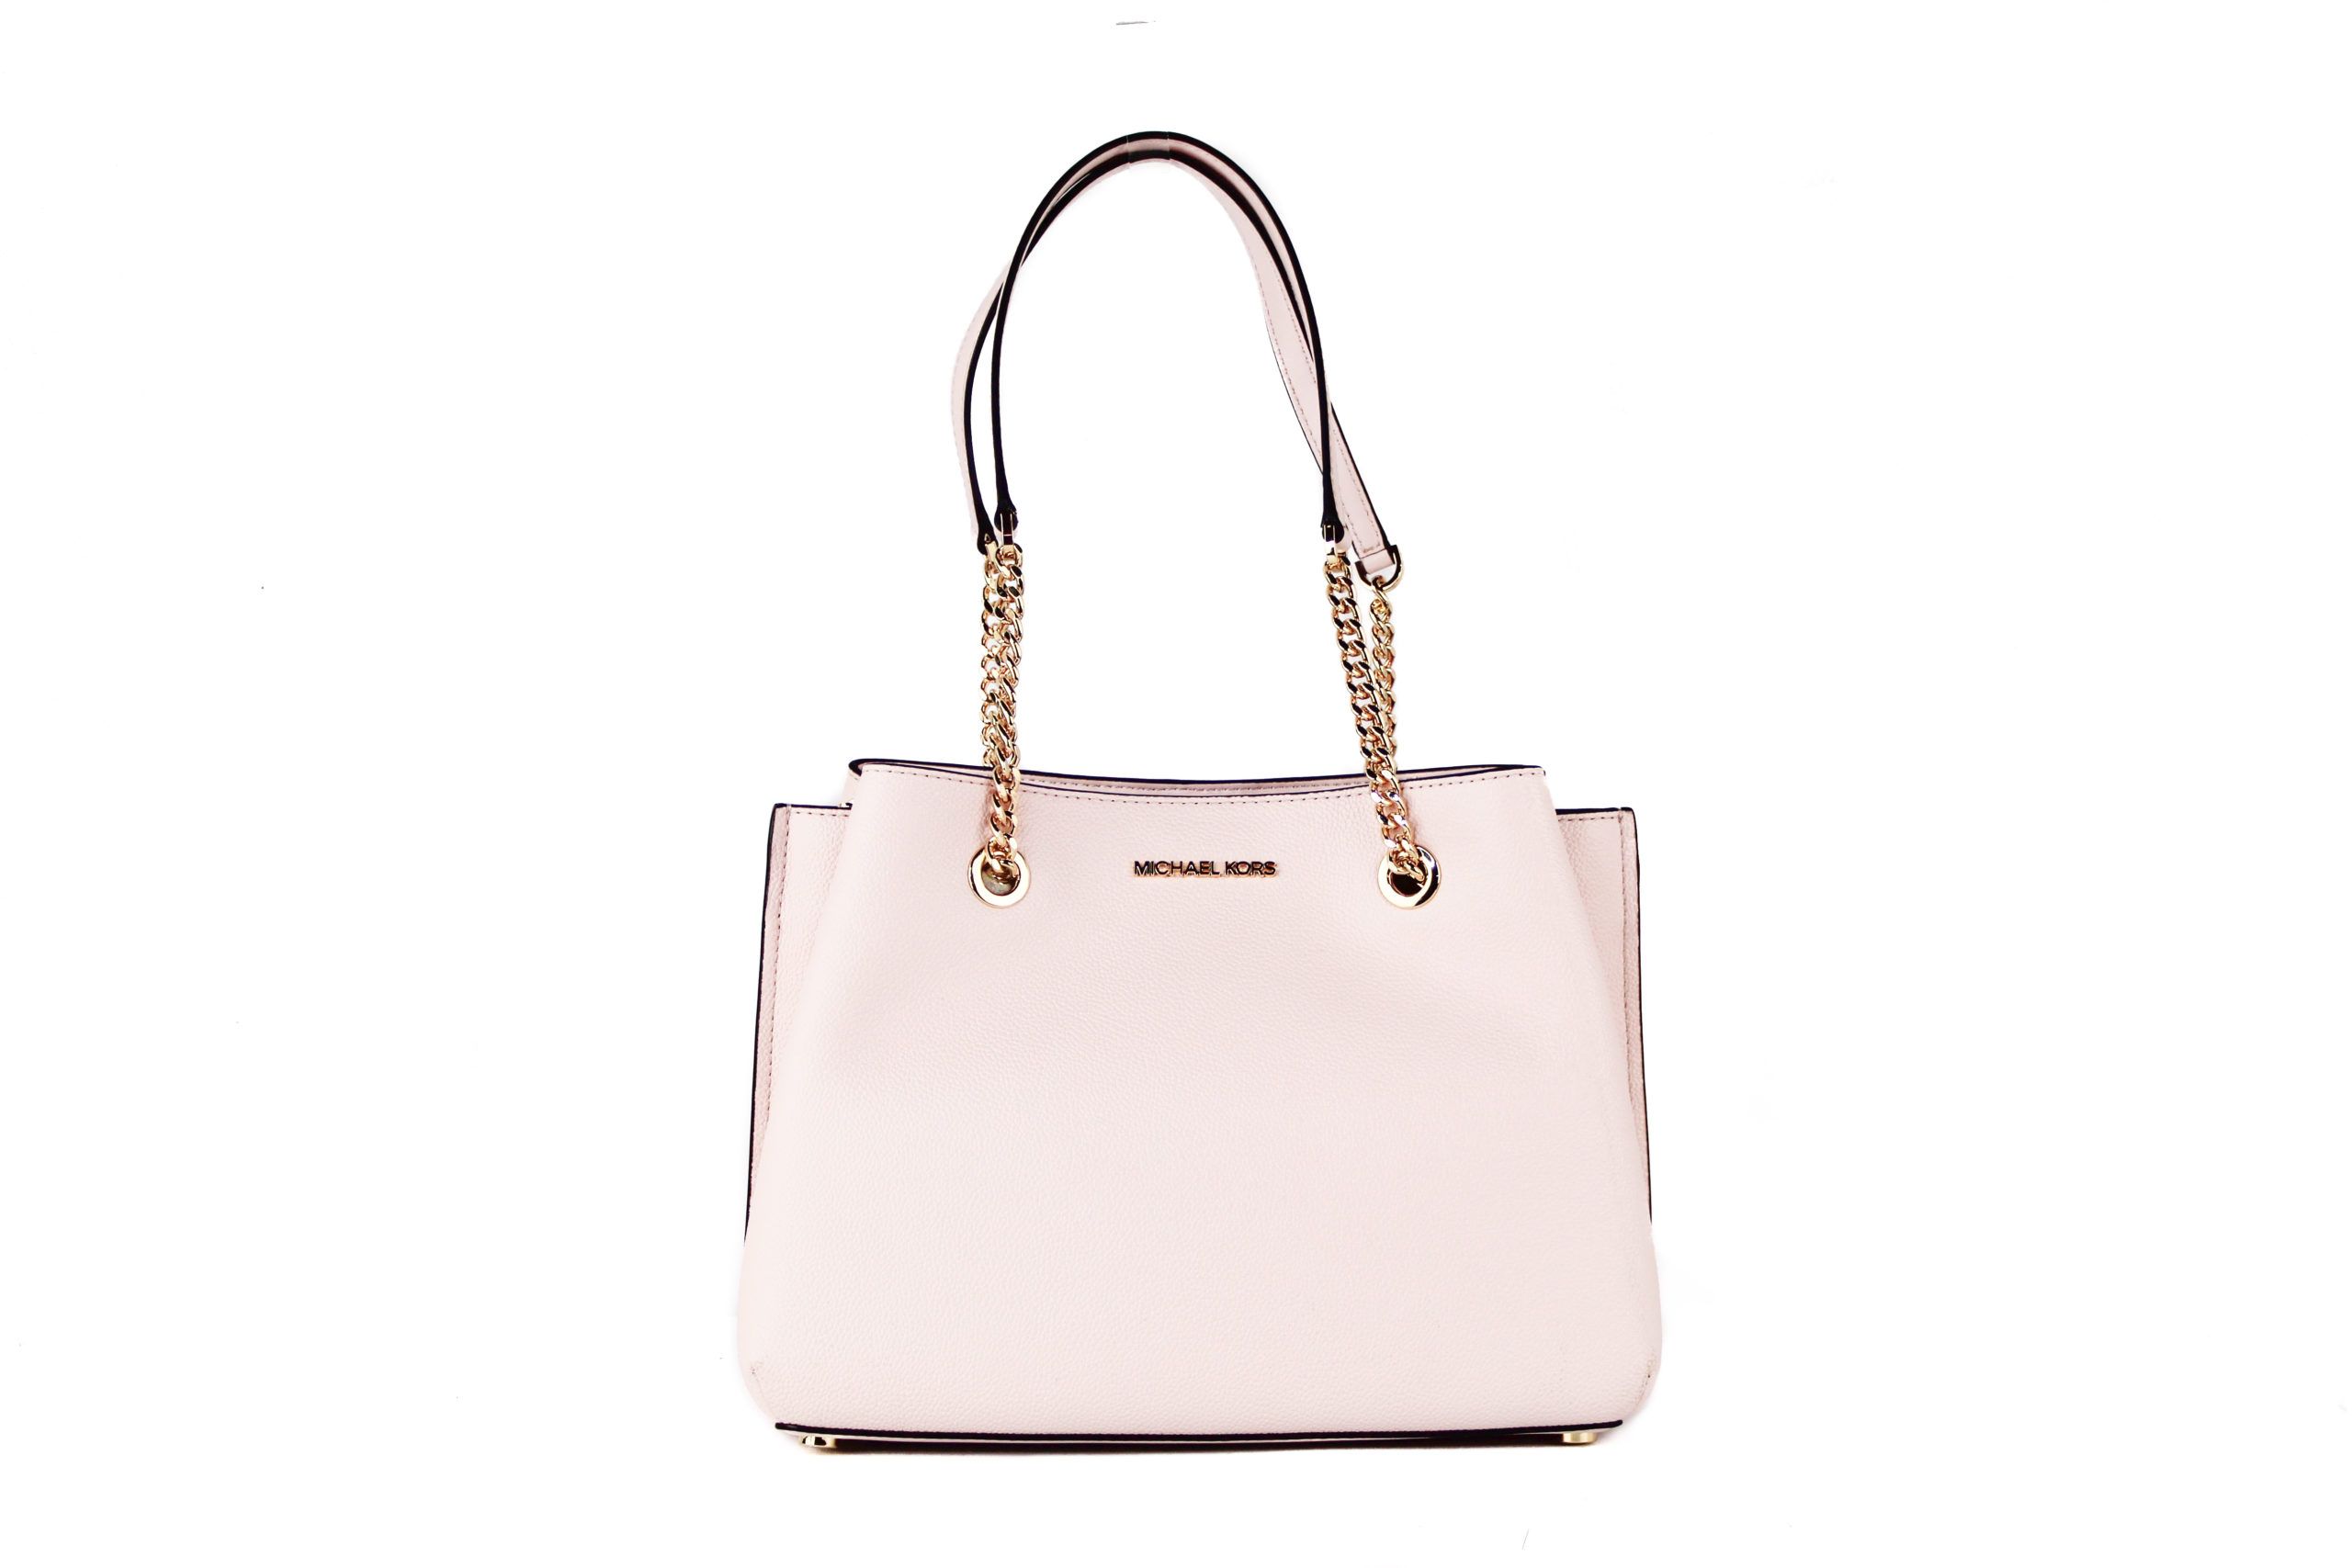 Brand New with Tags attached (100% Authentic). 
Style: Michael Kors Teagen Large Long Drop Satchel Bag (Powder Blush). 
Material: Pebble Leather 
. 
Features:  Magnetic Snap Closure, Center Zip Compartment, 2 Interior Slip Pockets, 1 Interior Wall Zip Pocket, 
Chain Accented Strap. 
Measures: 30.48cm. W x 22.86cm H x 15.24cm D.